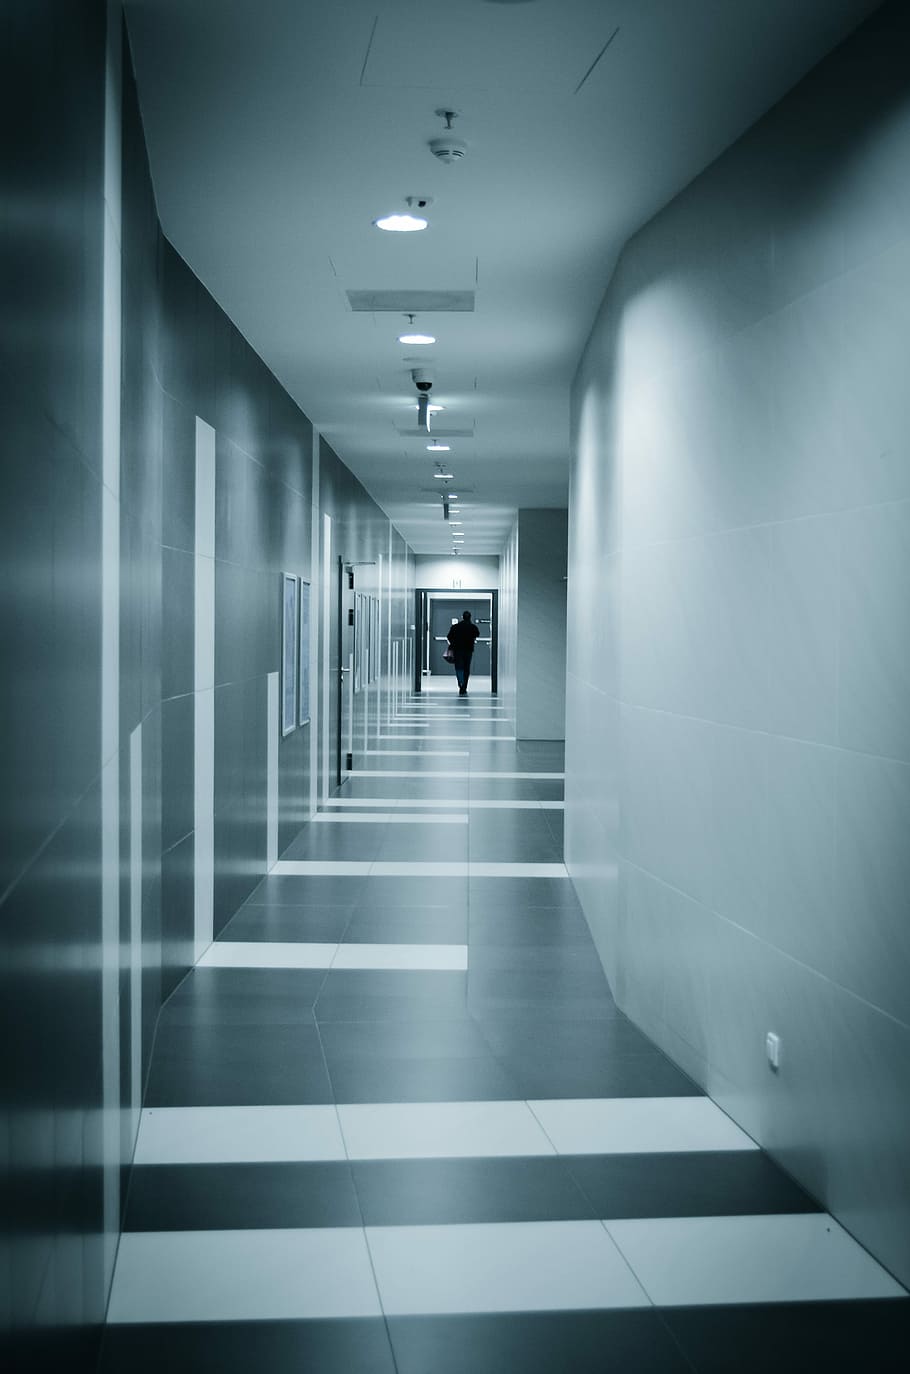 close photo of person walking in pathway on building, corridor